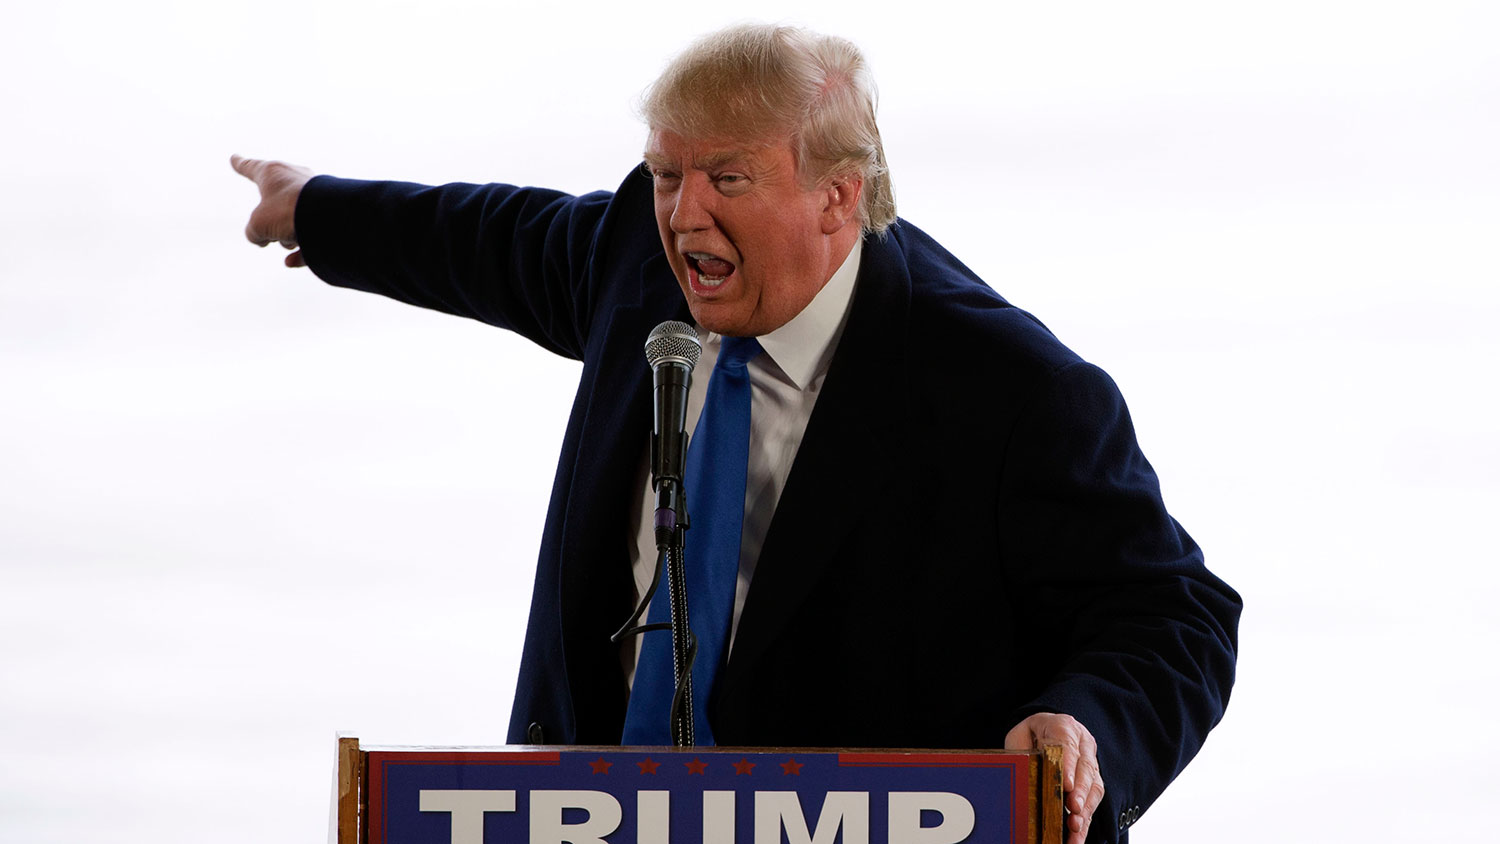 Republican presidential candidate Donald Trump speaks on March 13, 2016, in Bloomington, Illinois.
